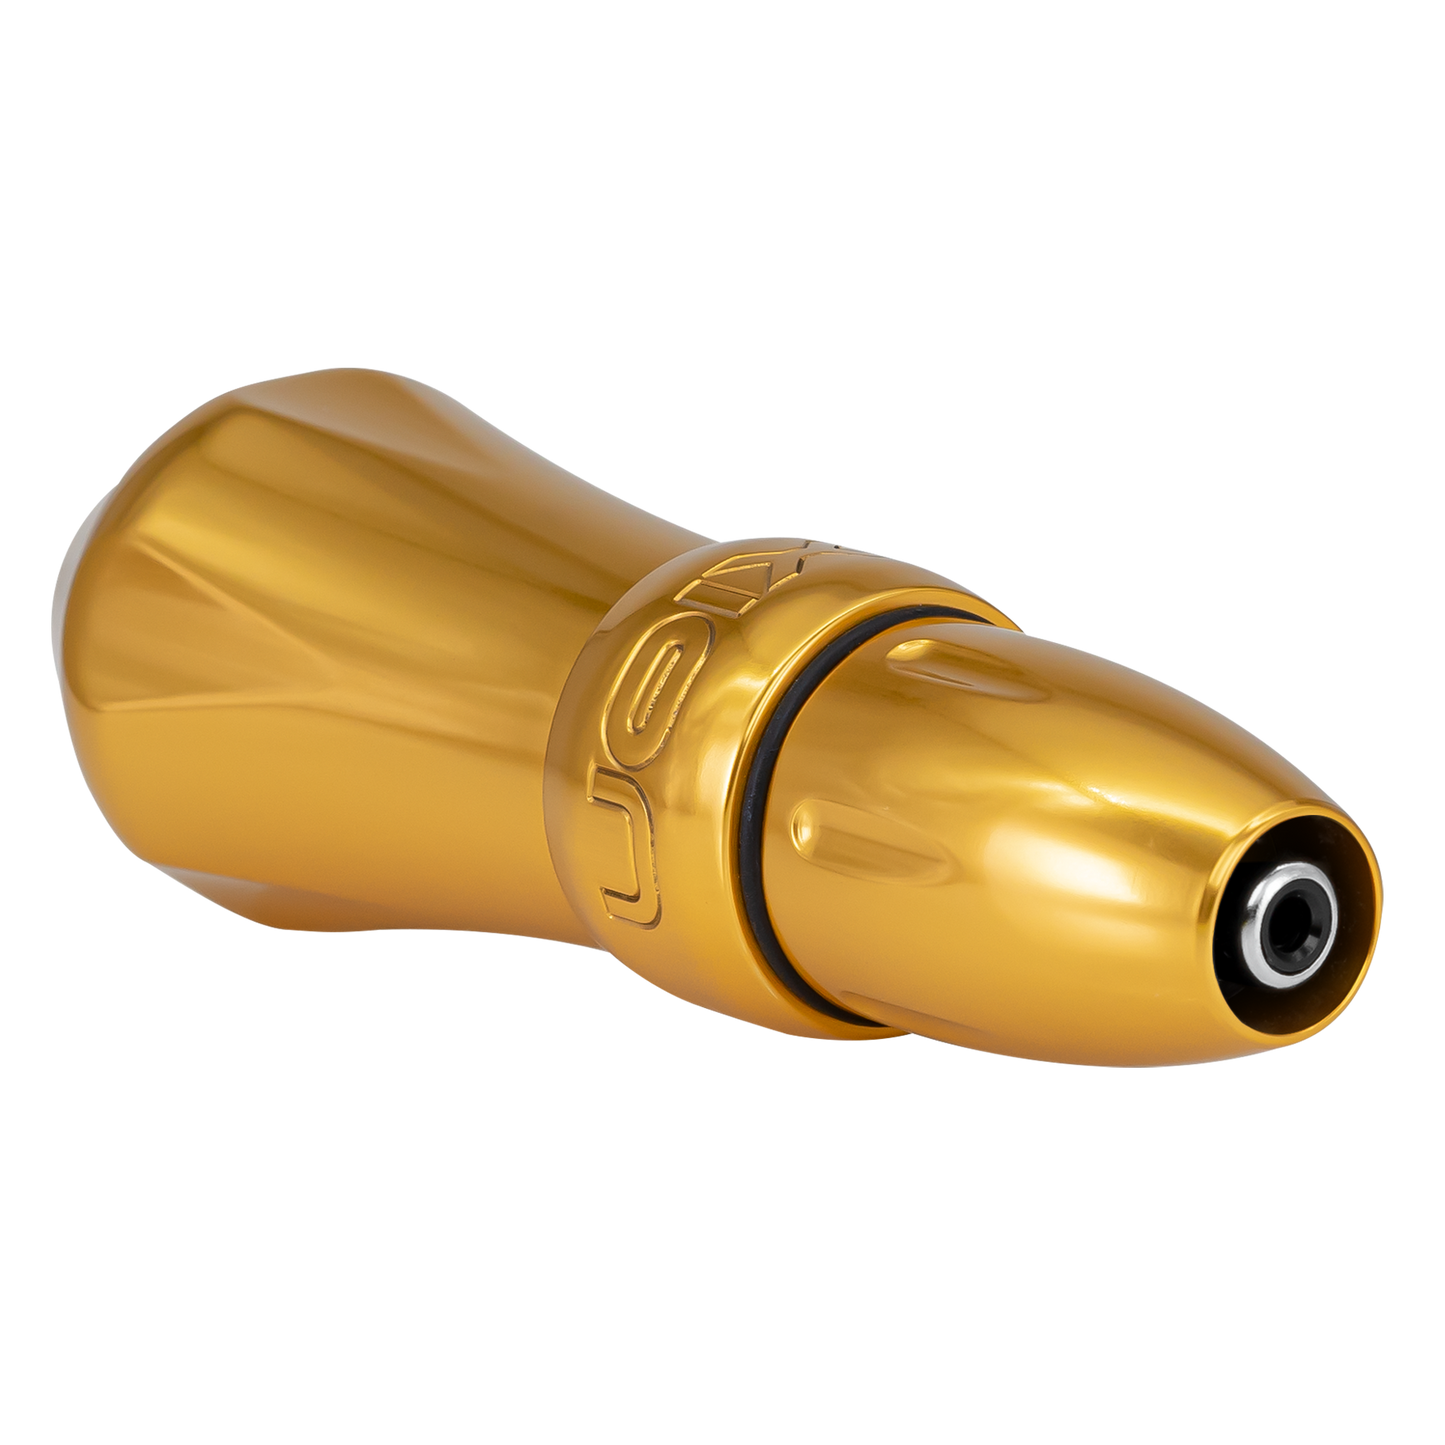 Spektra Xion in goldtone with a larger grip